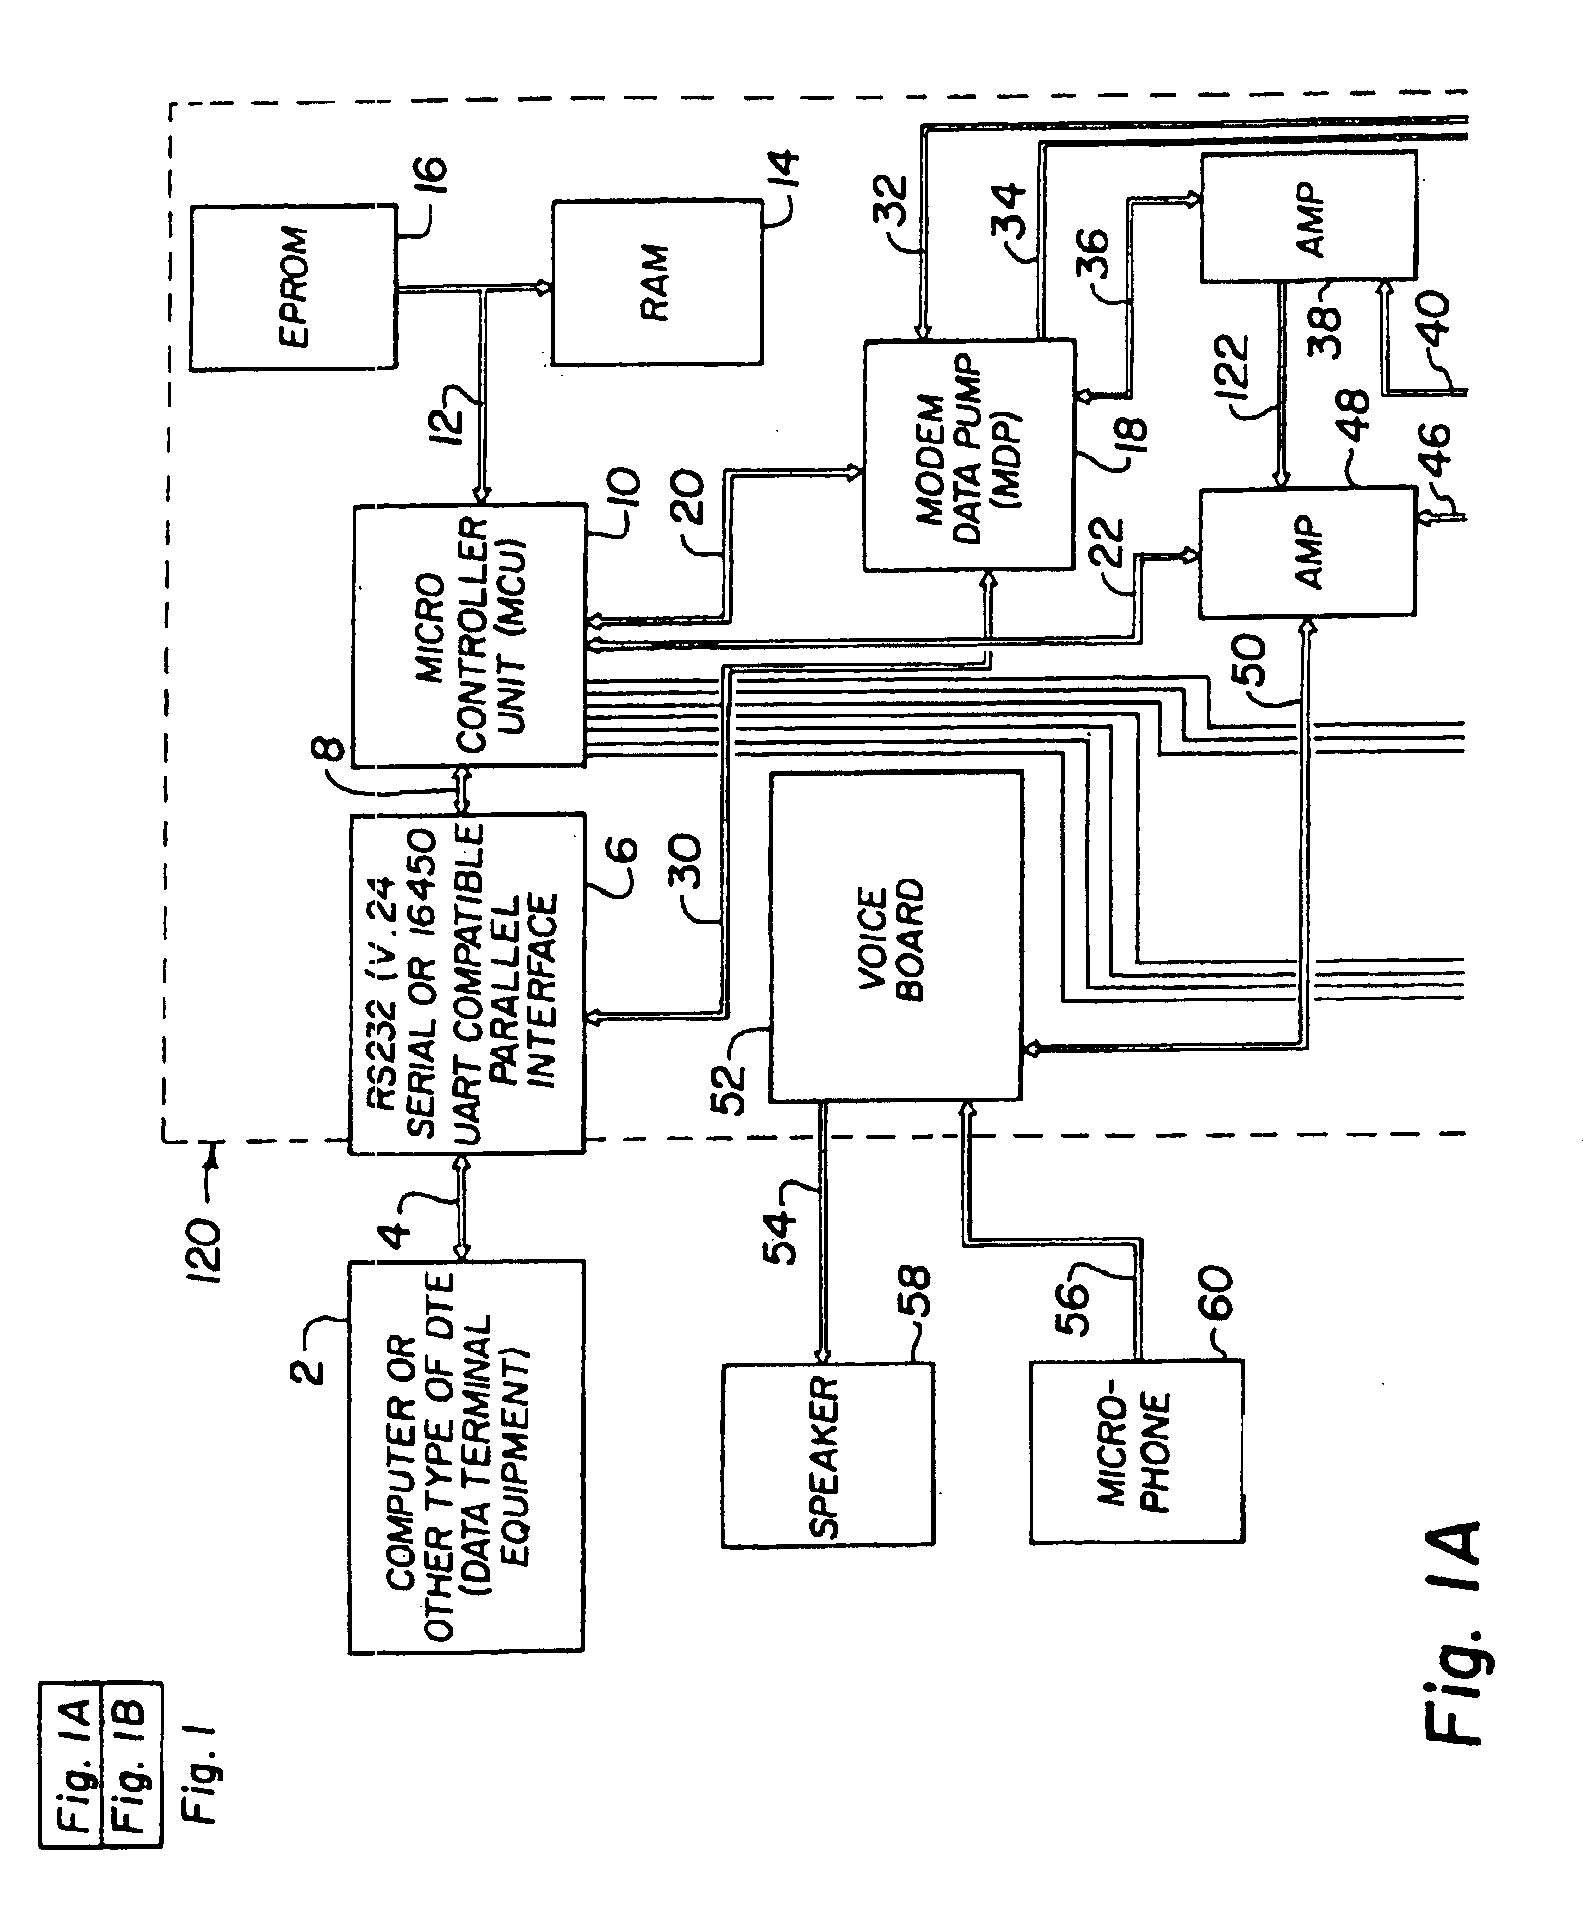 Method and apparatus for transmission of analog and digital